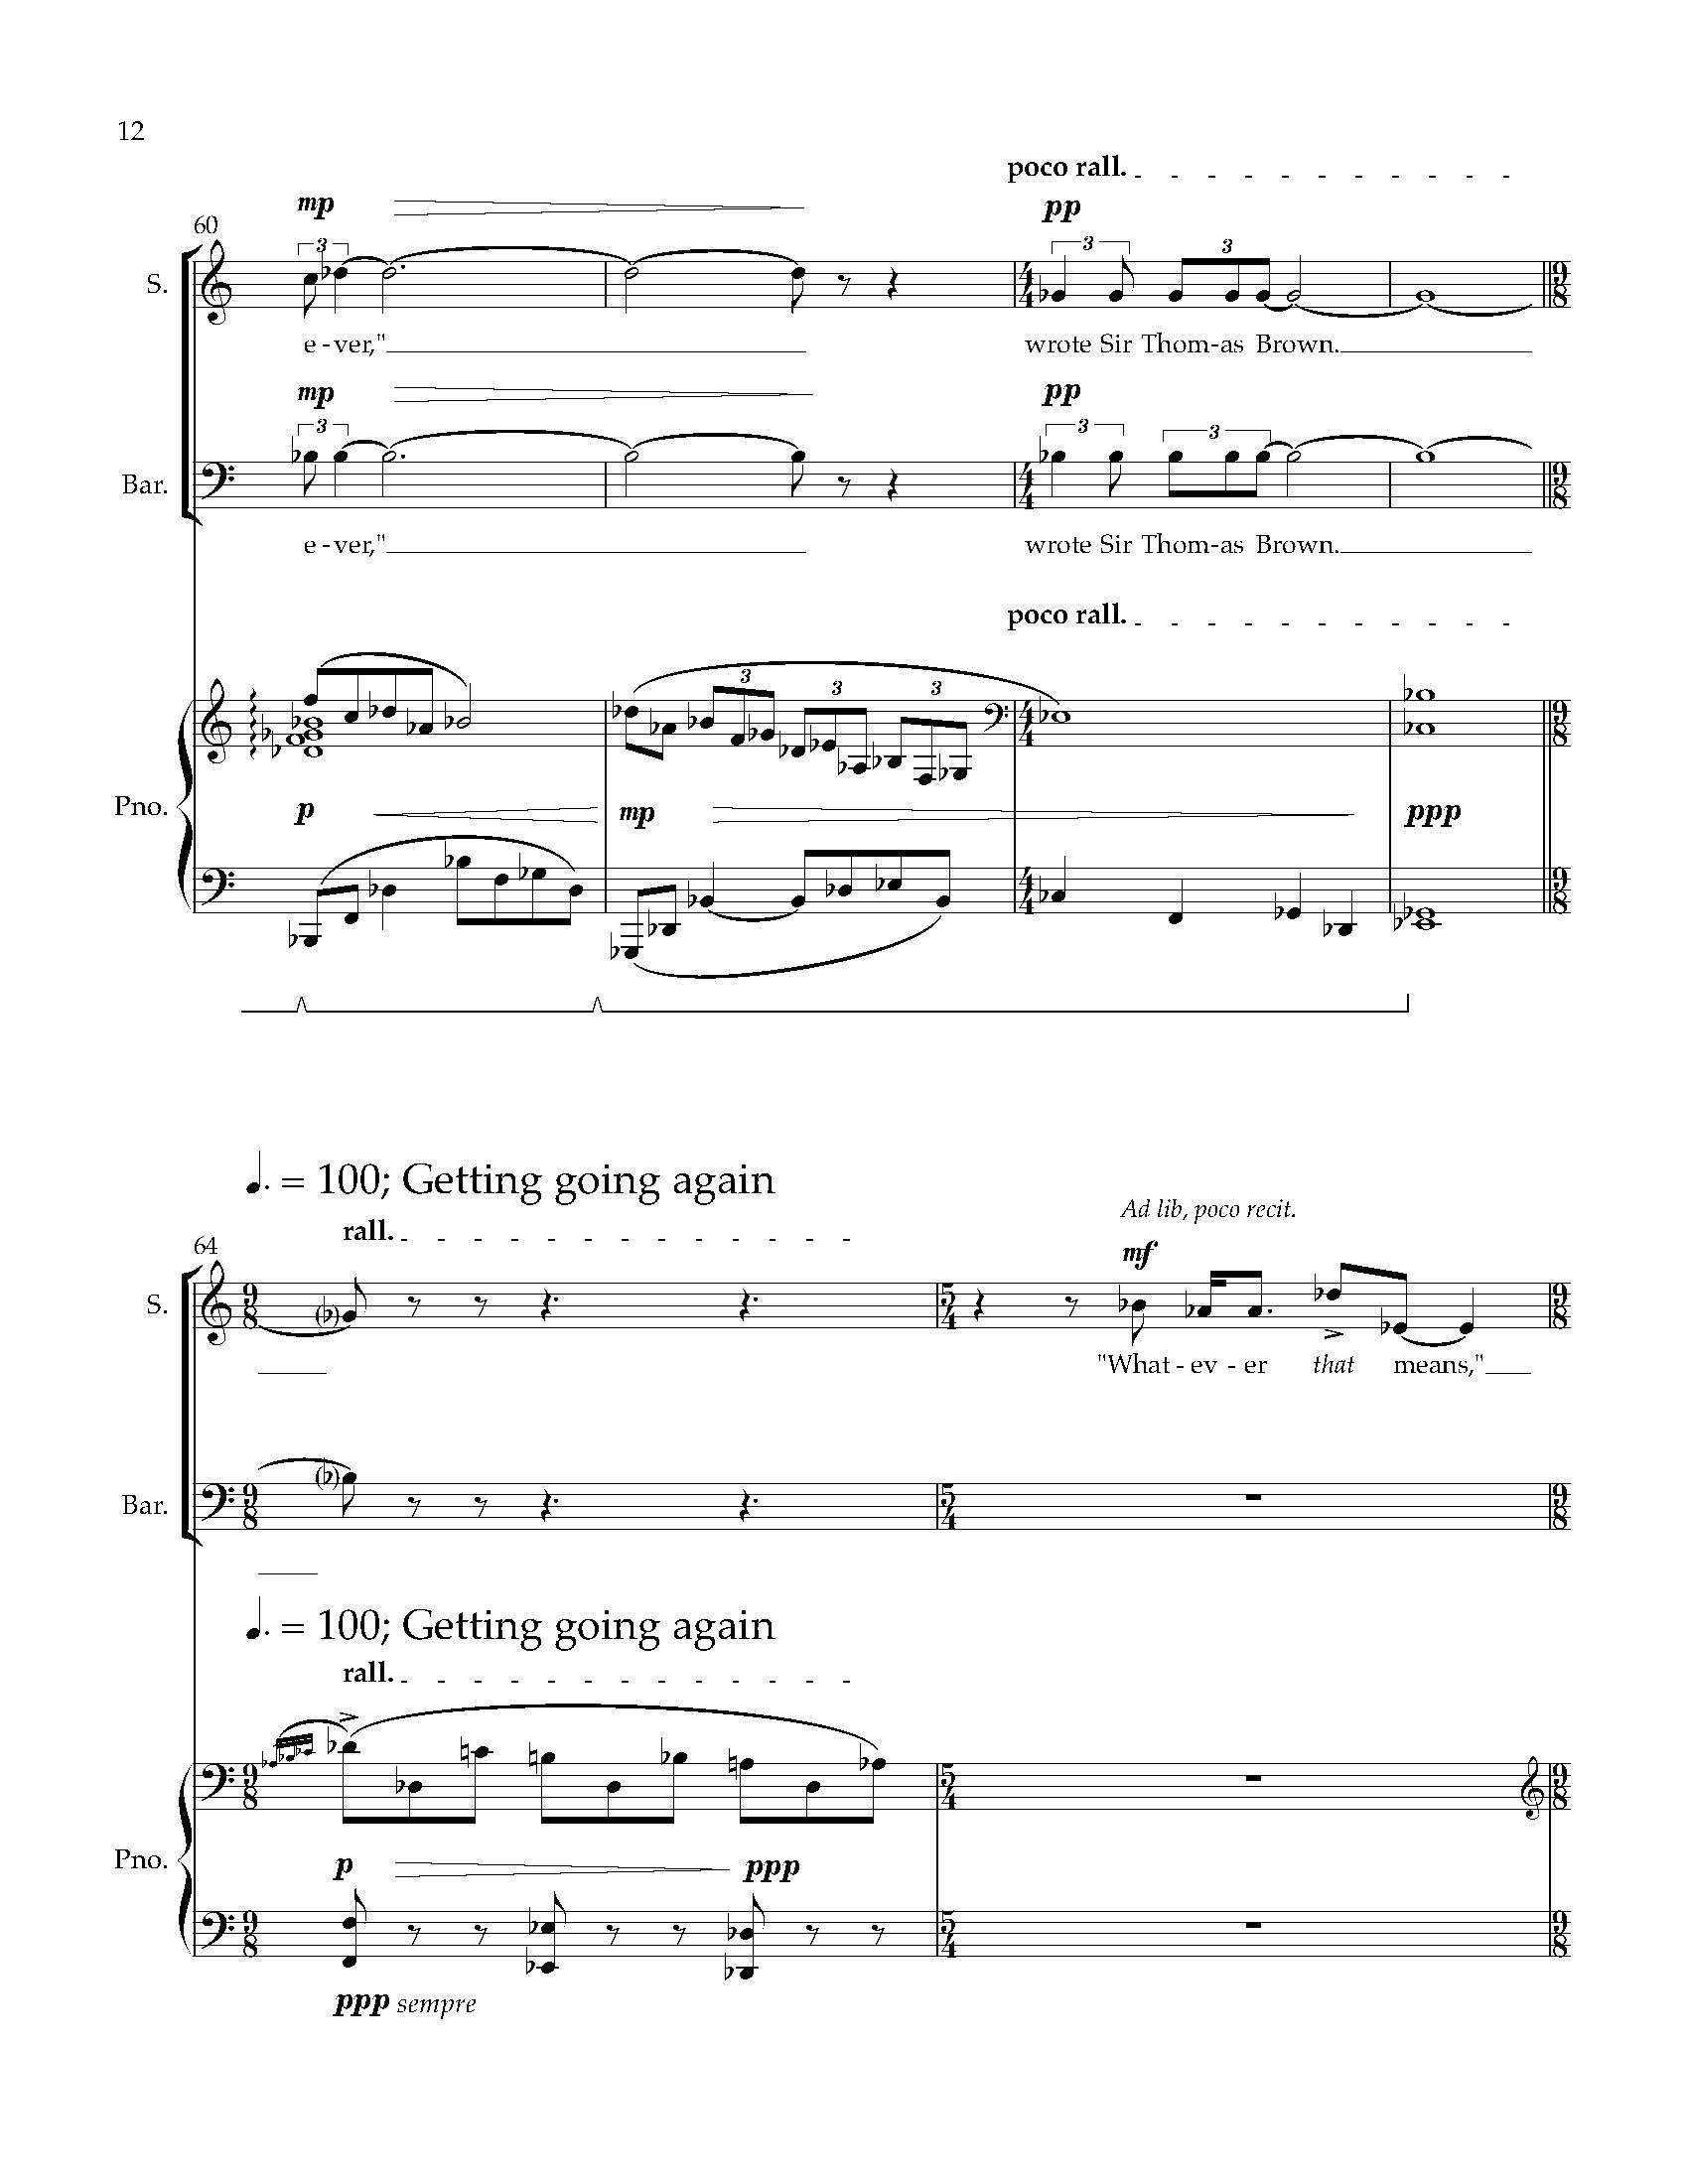 Sky - Complete Score (Revised)_Page_18.jpg